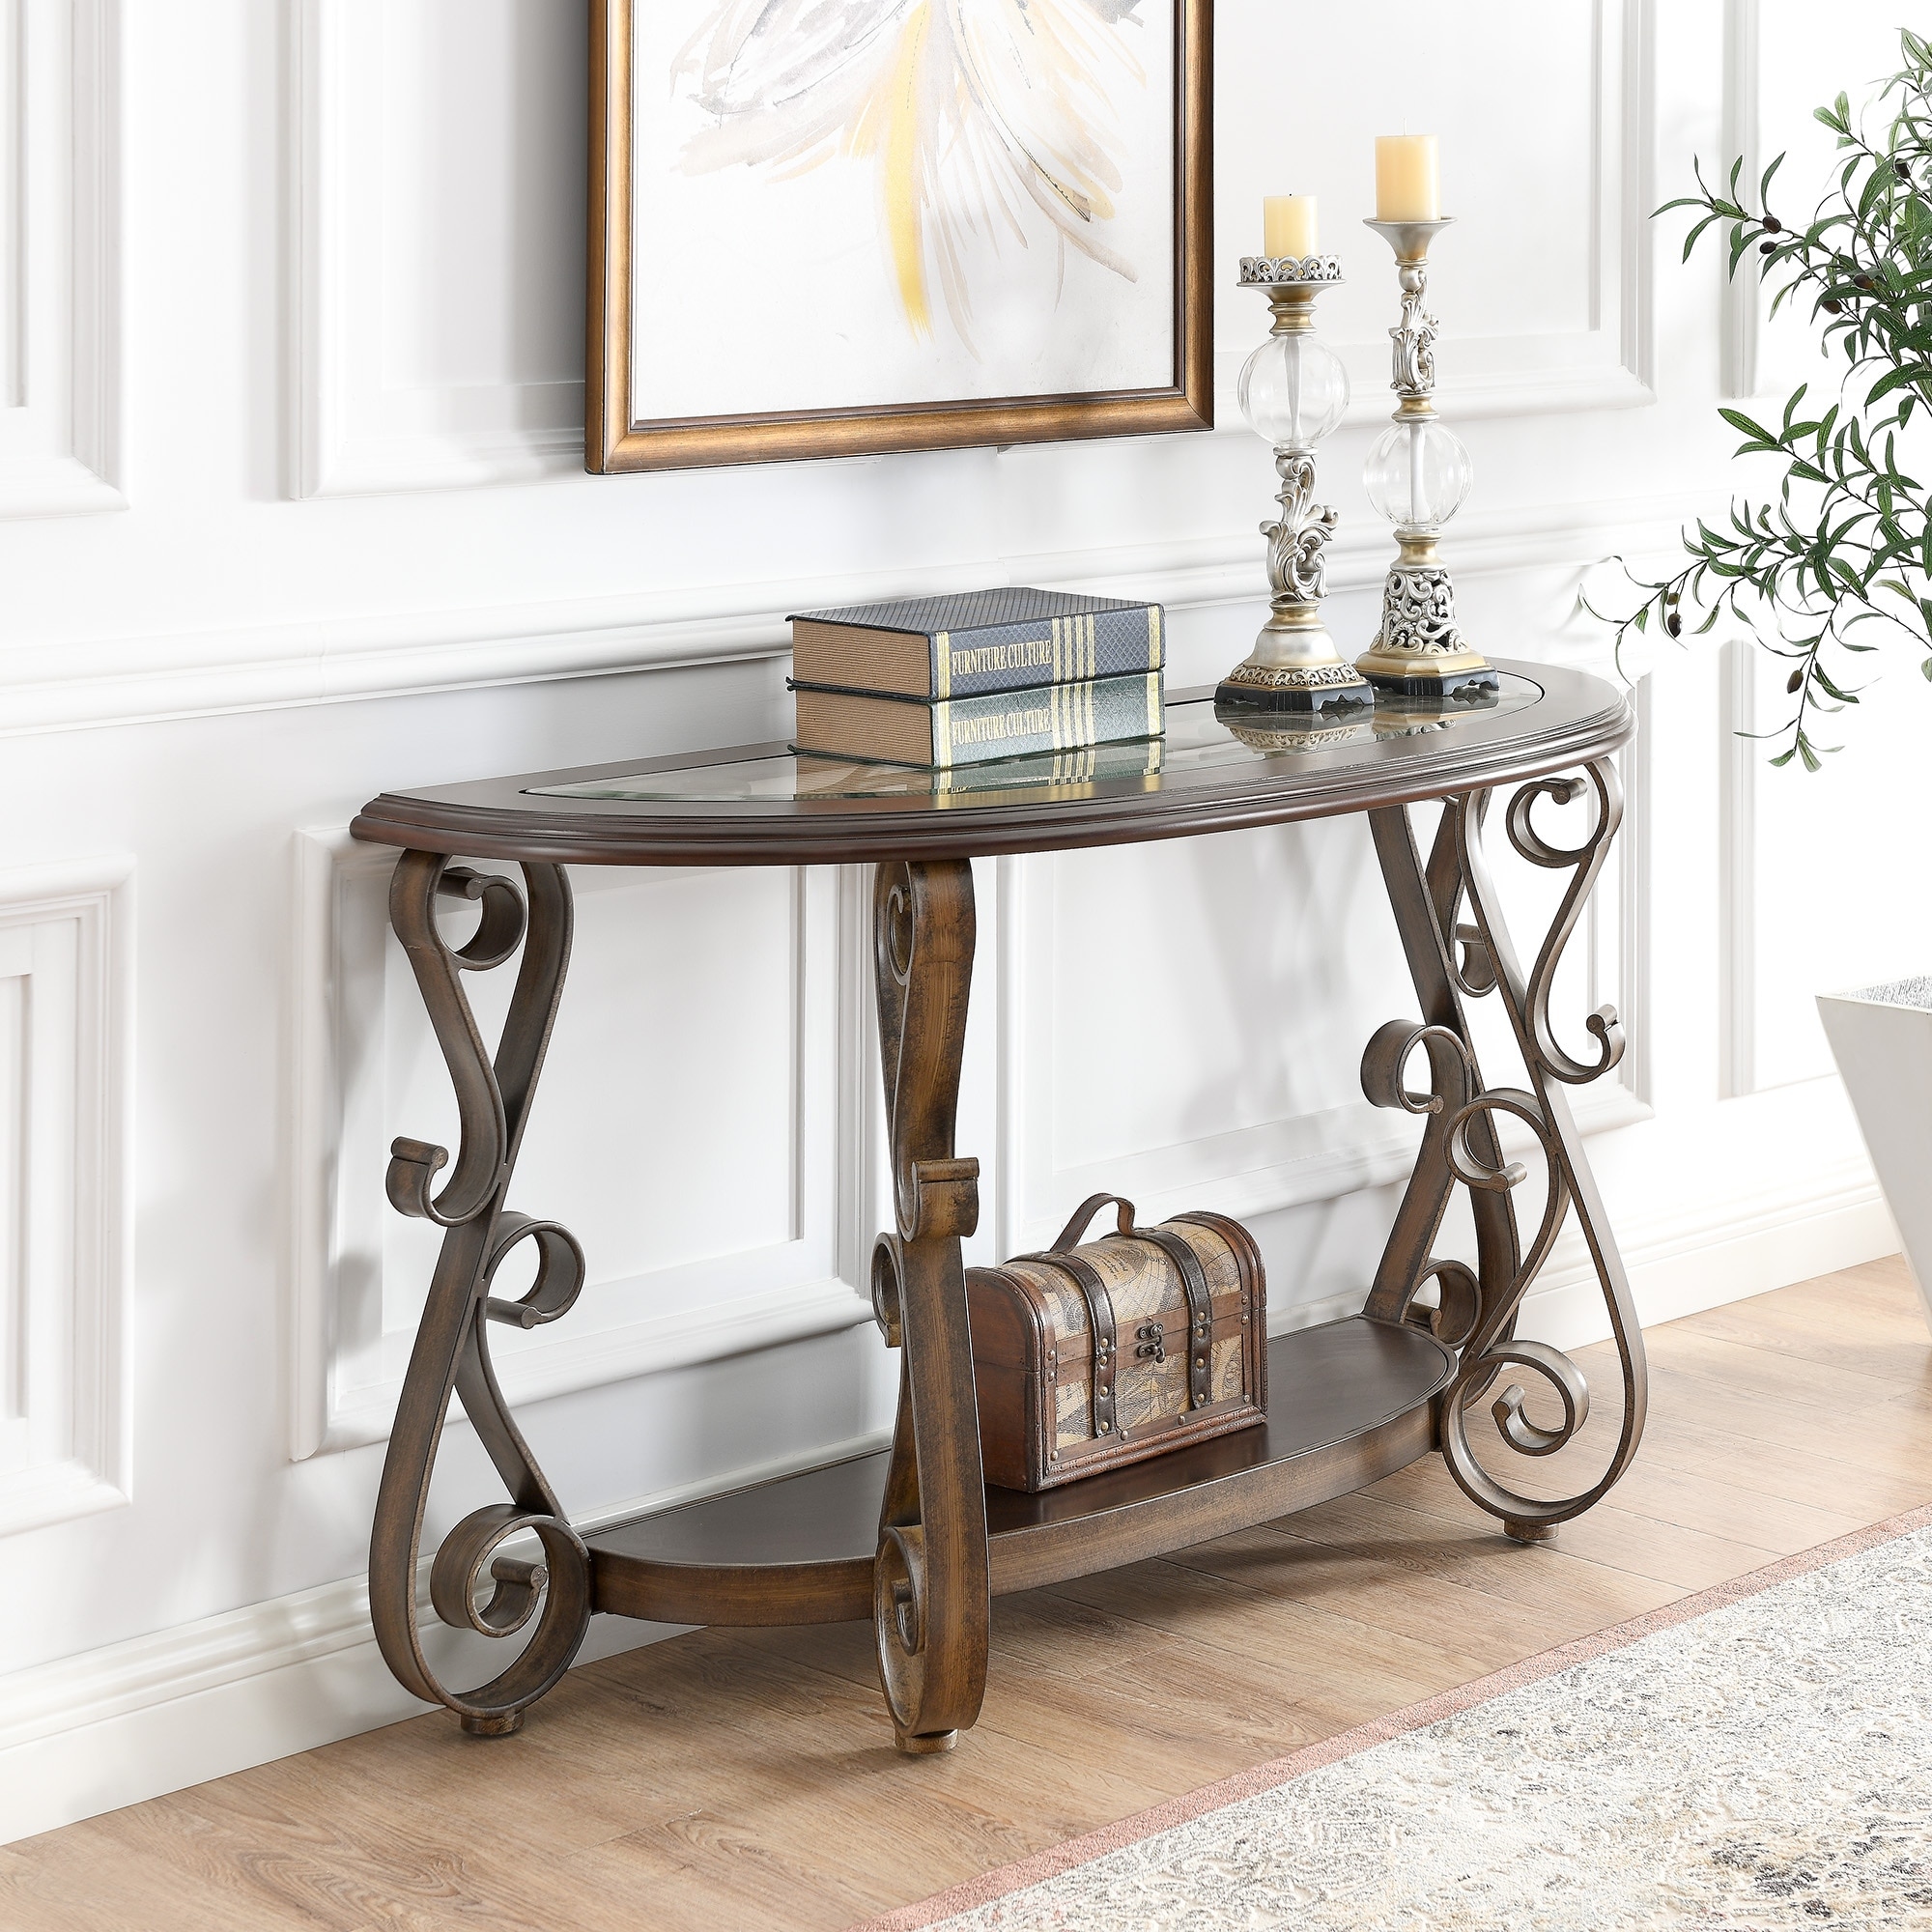 CTEX Console Table with Glass Table Top and Powder Coat Finish Metal Legs,Dark Brown